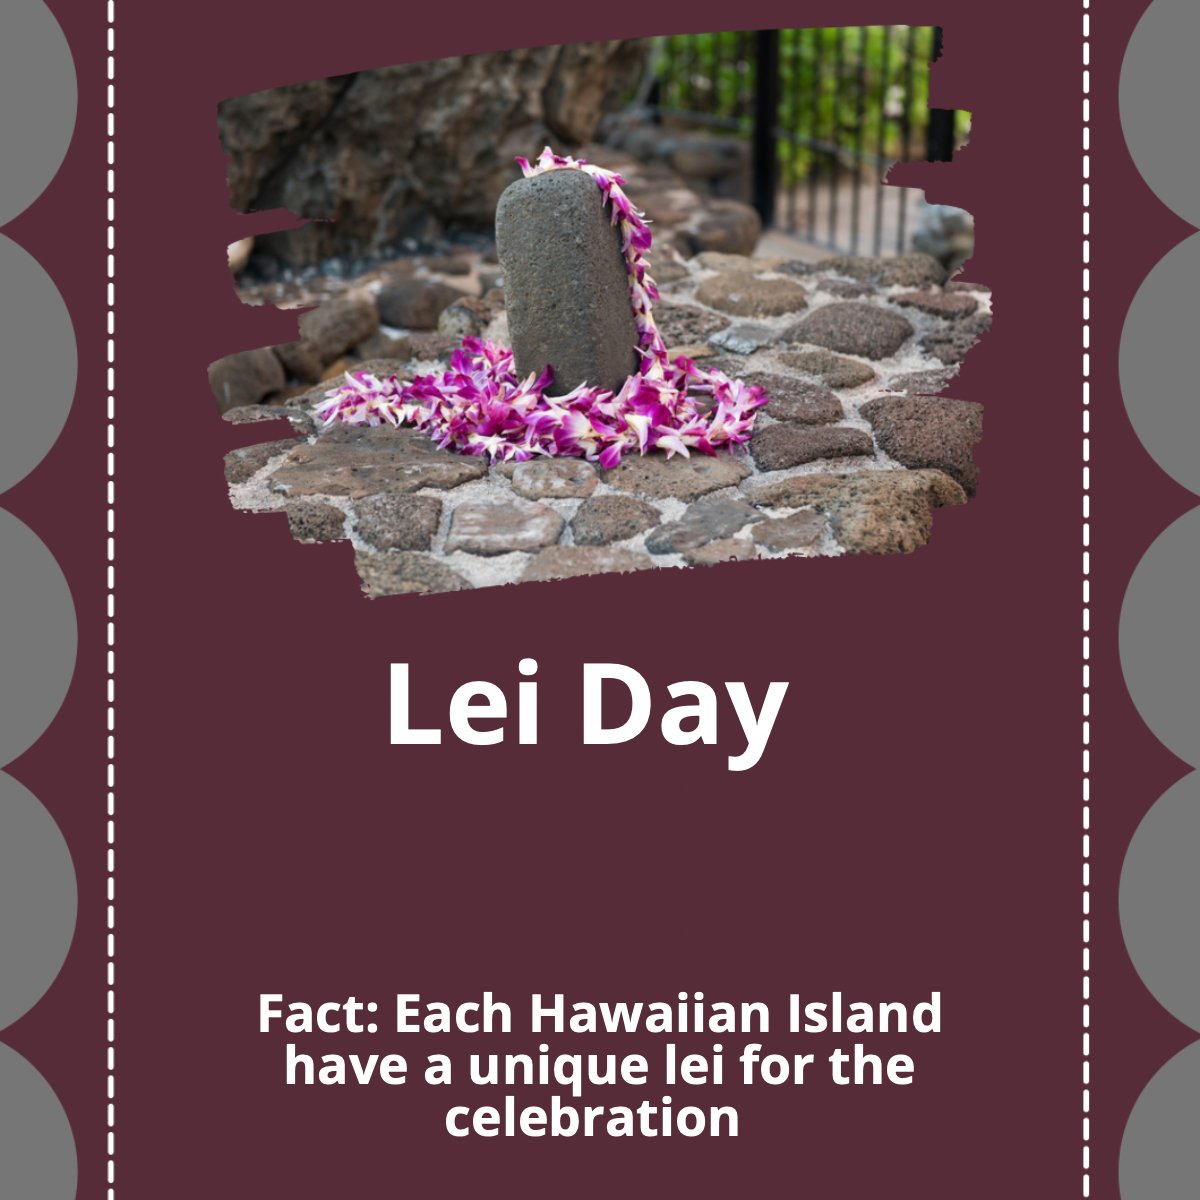 Happy Lei Day to all who celebrate 🙌!

Did you know? 🤔  Each Hawaiian island has a unique lei for the celebration. 😱

#lei #day #hawaii #flowers #celebration #grey
 #homeselling #evanrussell #realestate #northreading #homesearch #homebuying #firsttimehomebuying